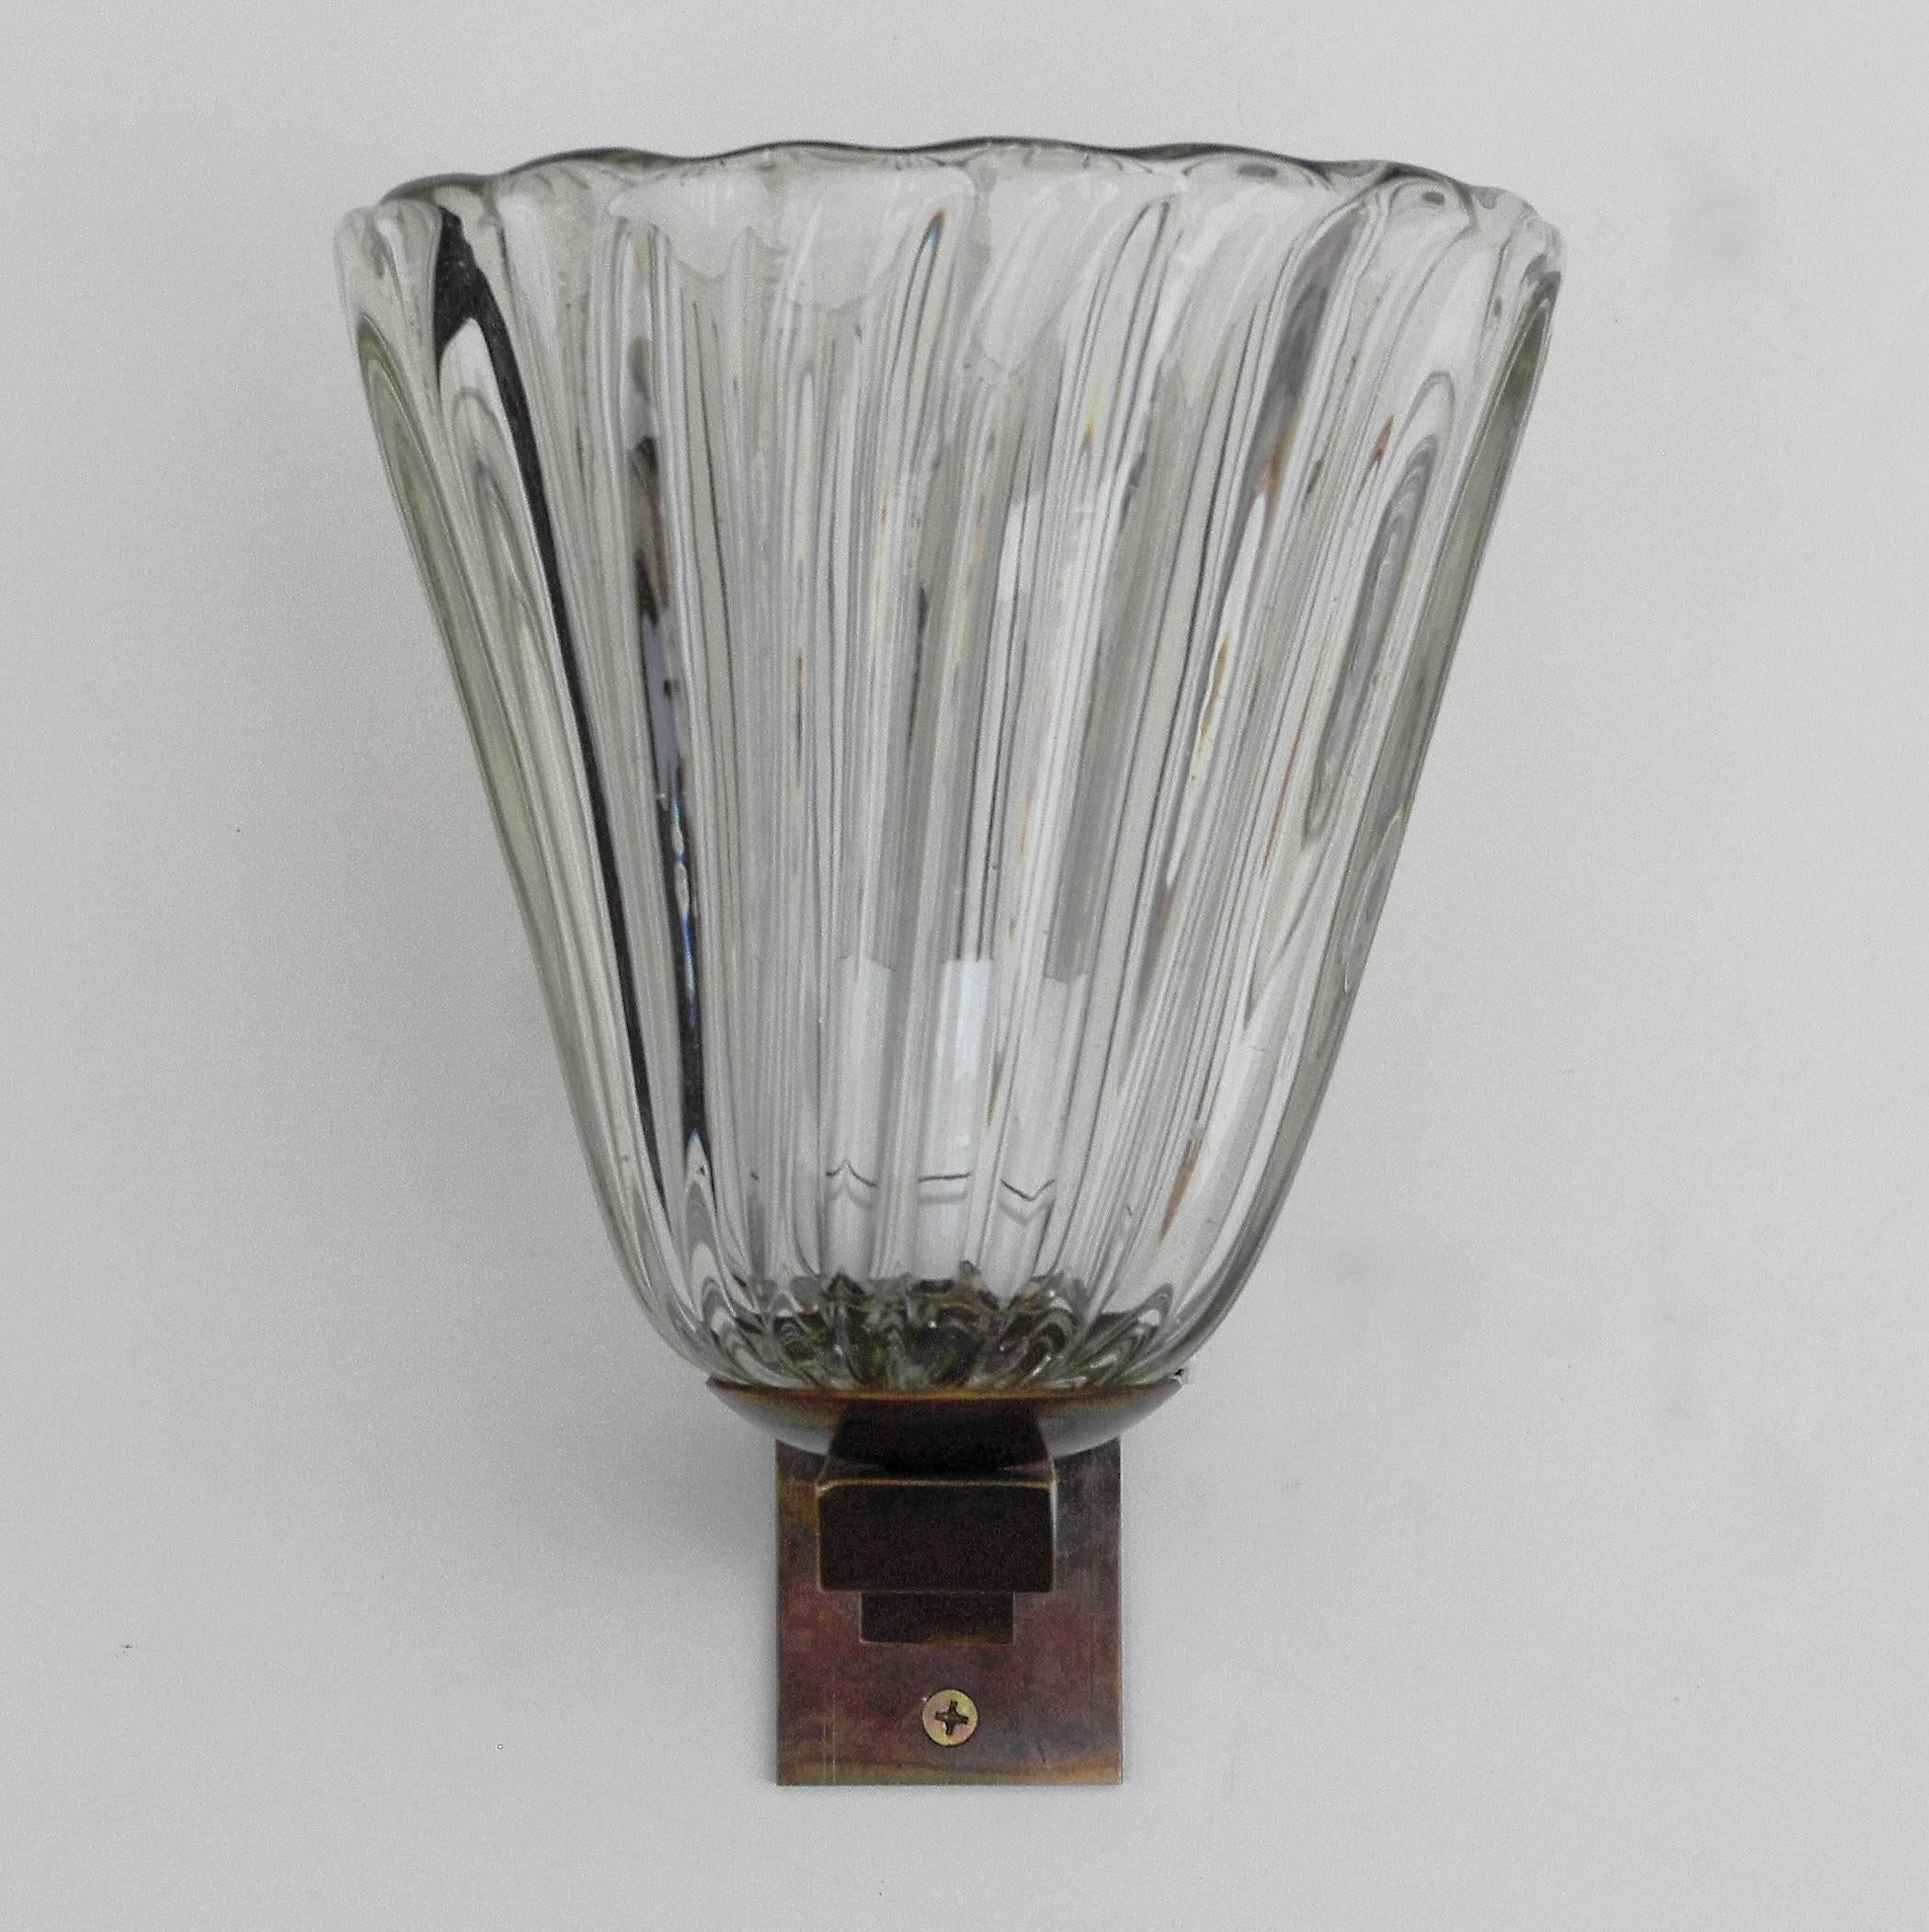 Vintage Italian wall light with clear ribbed Murano glass bell shade, mounted on brass bracket / Designed by Barovier e Toso, circa 1950s, with original 